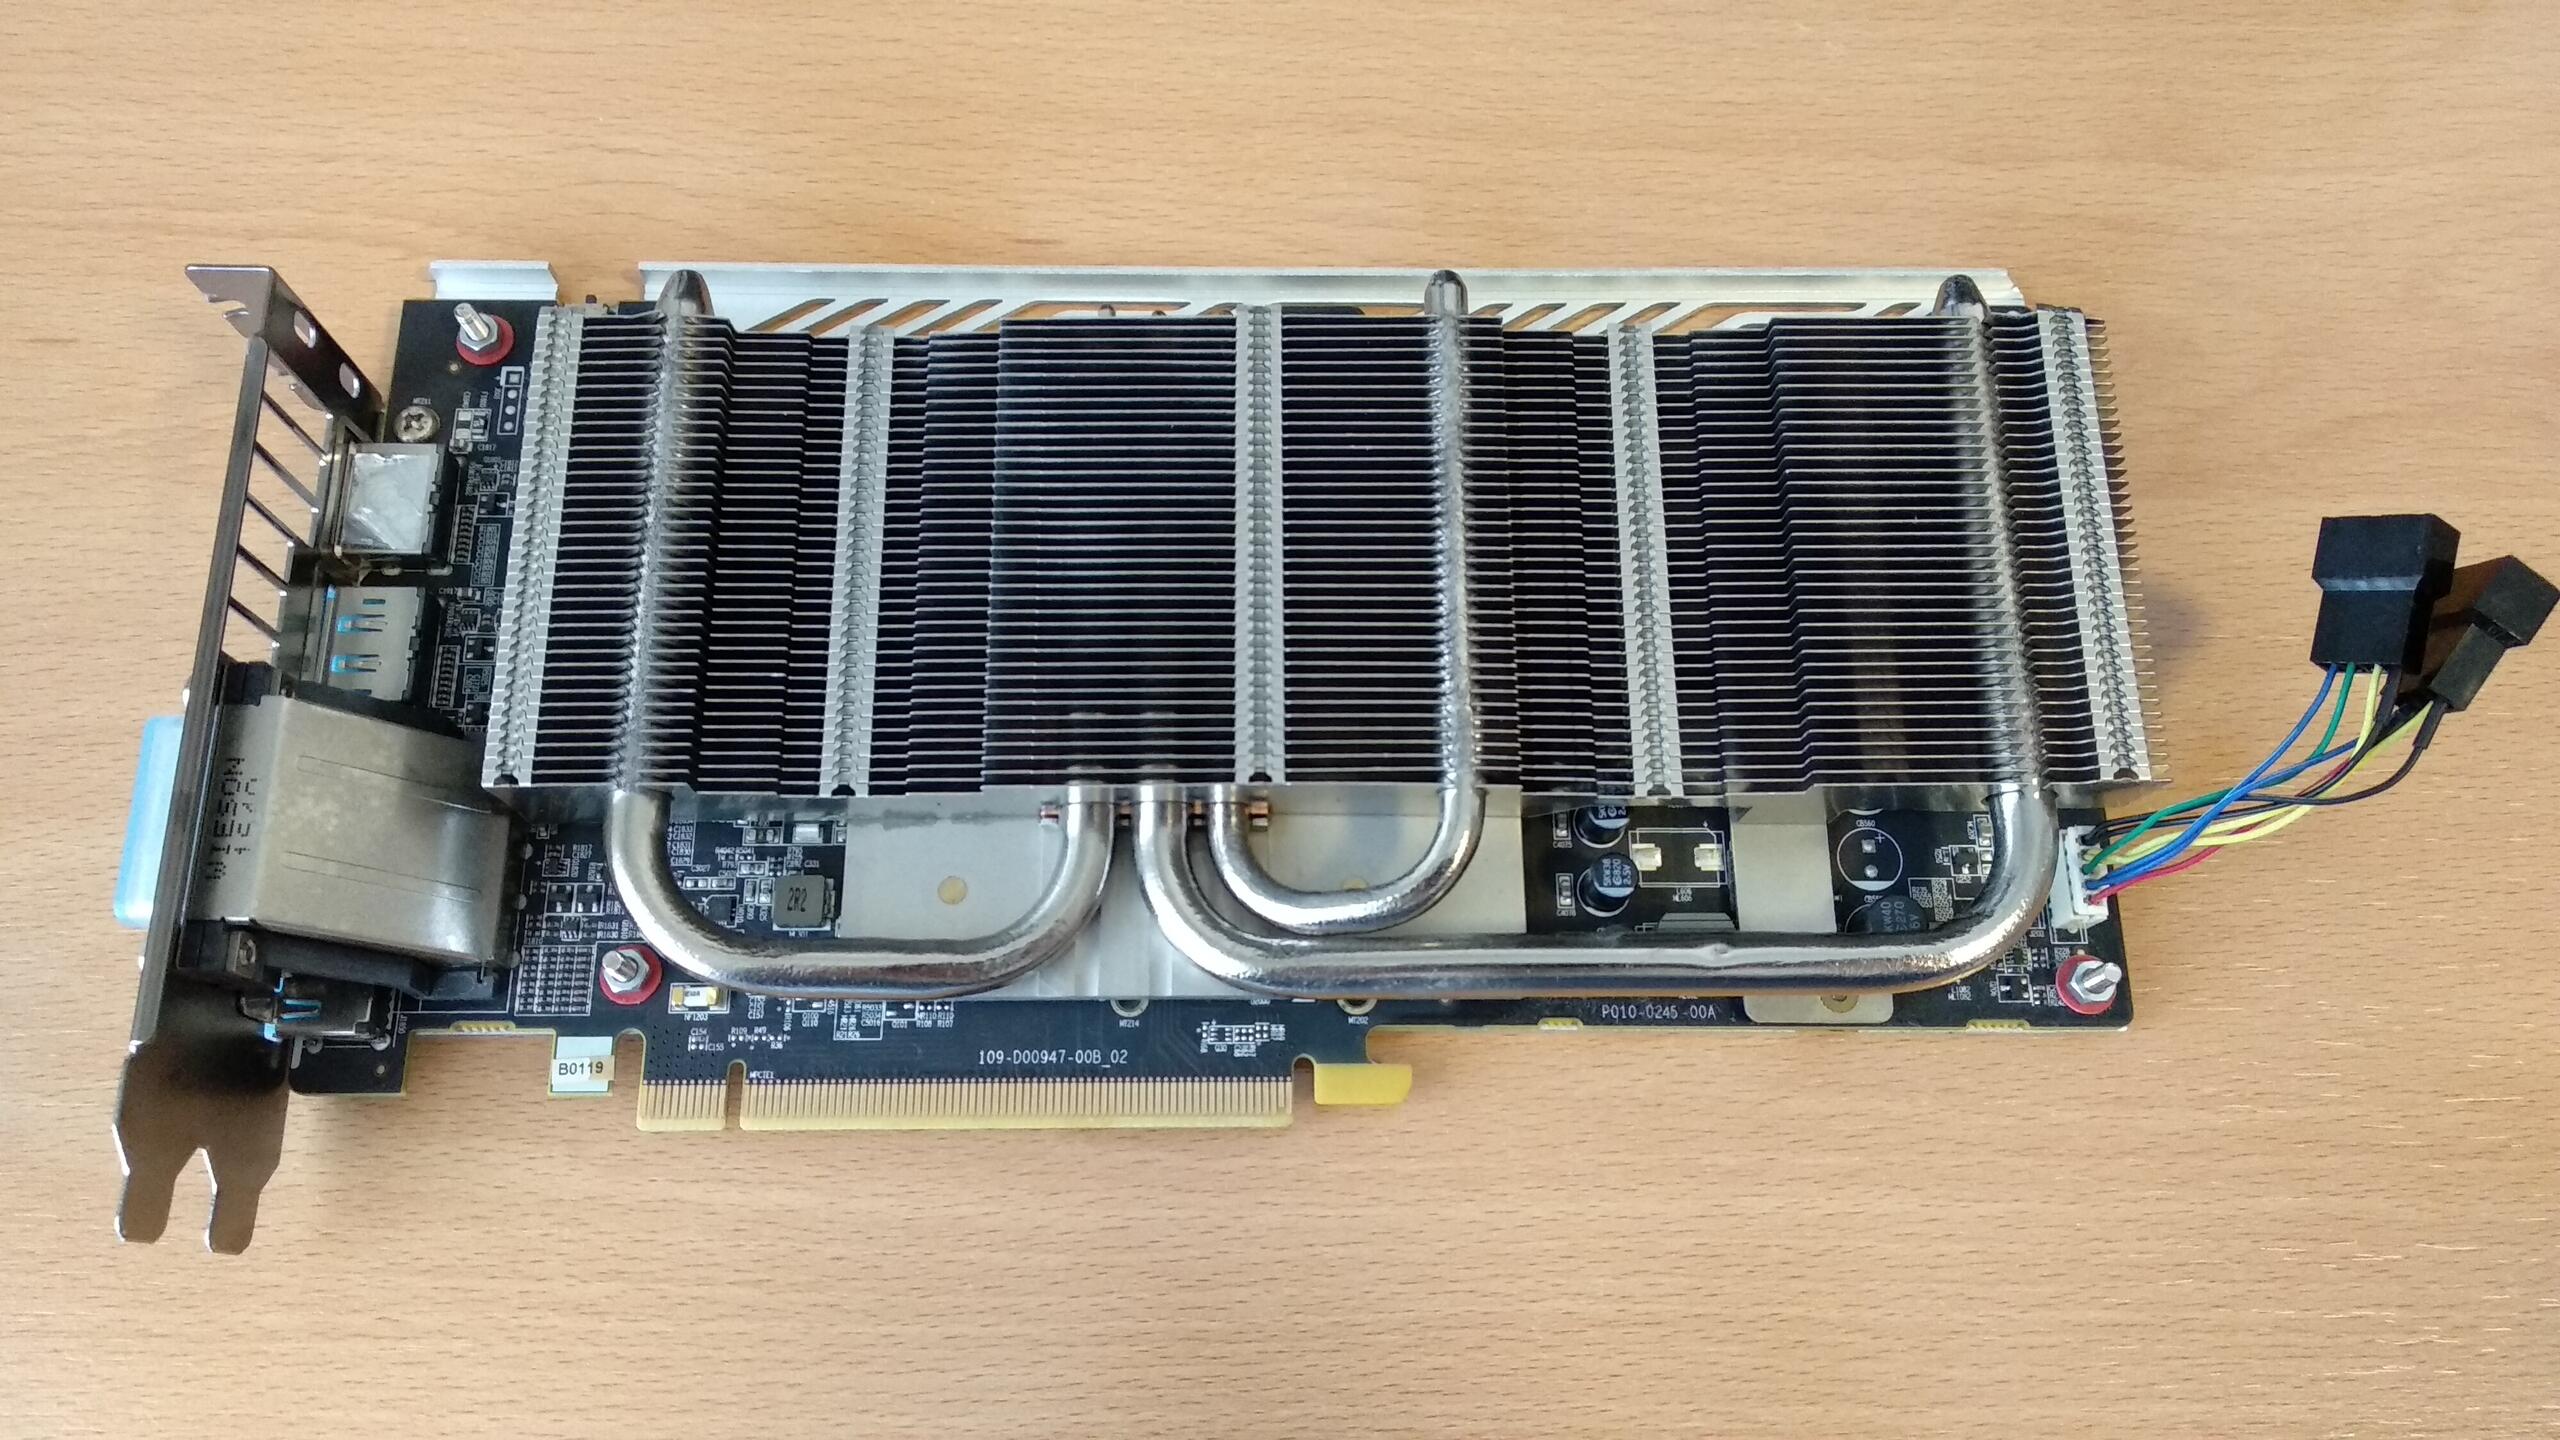 The graphics card with the backplate and the adapter attached.